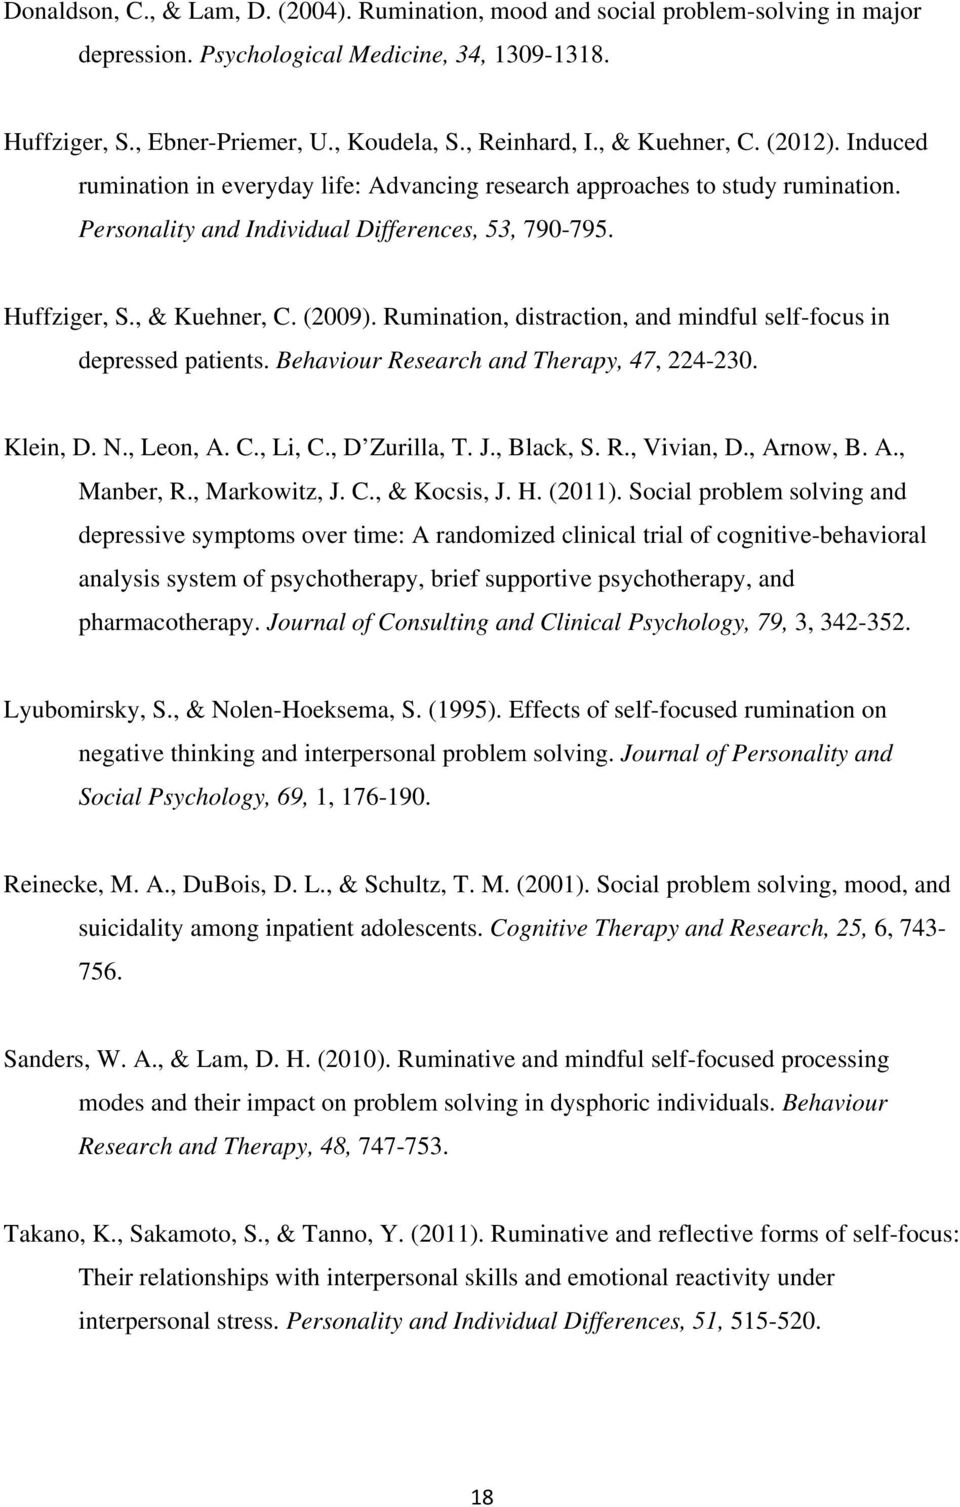 Rumination, distraction, and mindful self-focus in depressed patients. Behaviour Research and Therapy, 47, 224-230. Klein, D. N., Leon, A. C., Li, C., D Zurilla, T. J., Black, S. R., Vivian, D.